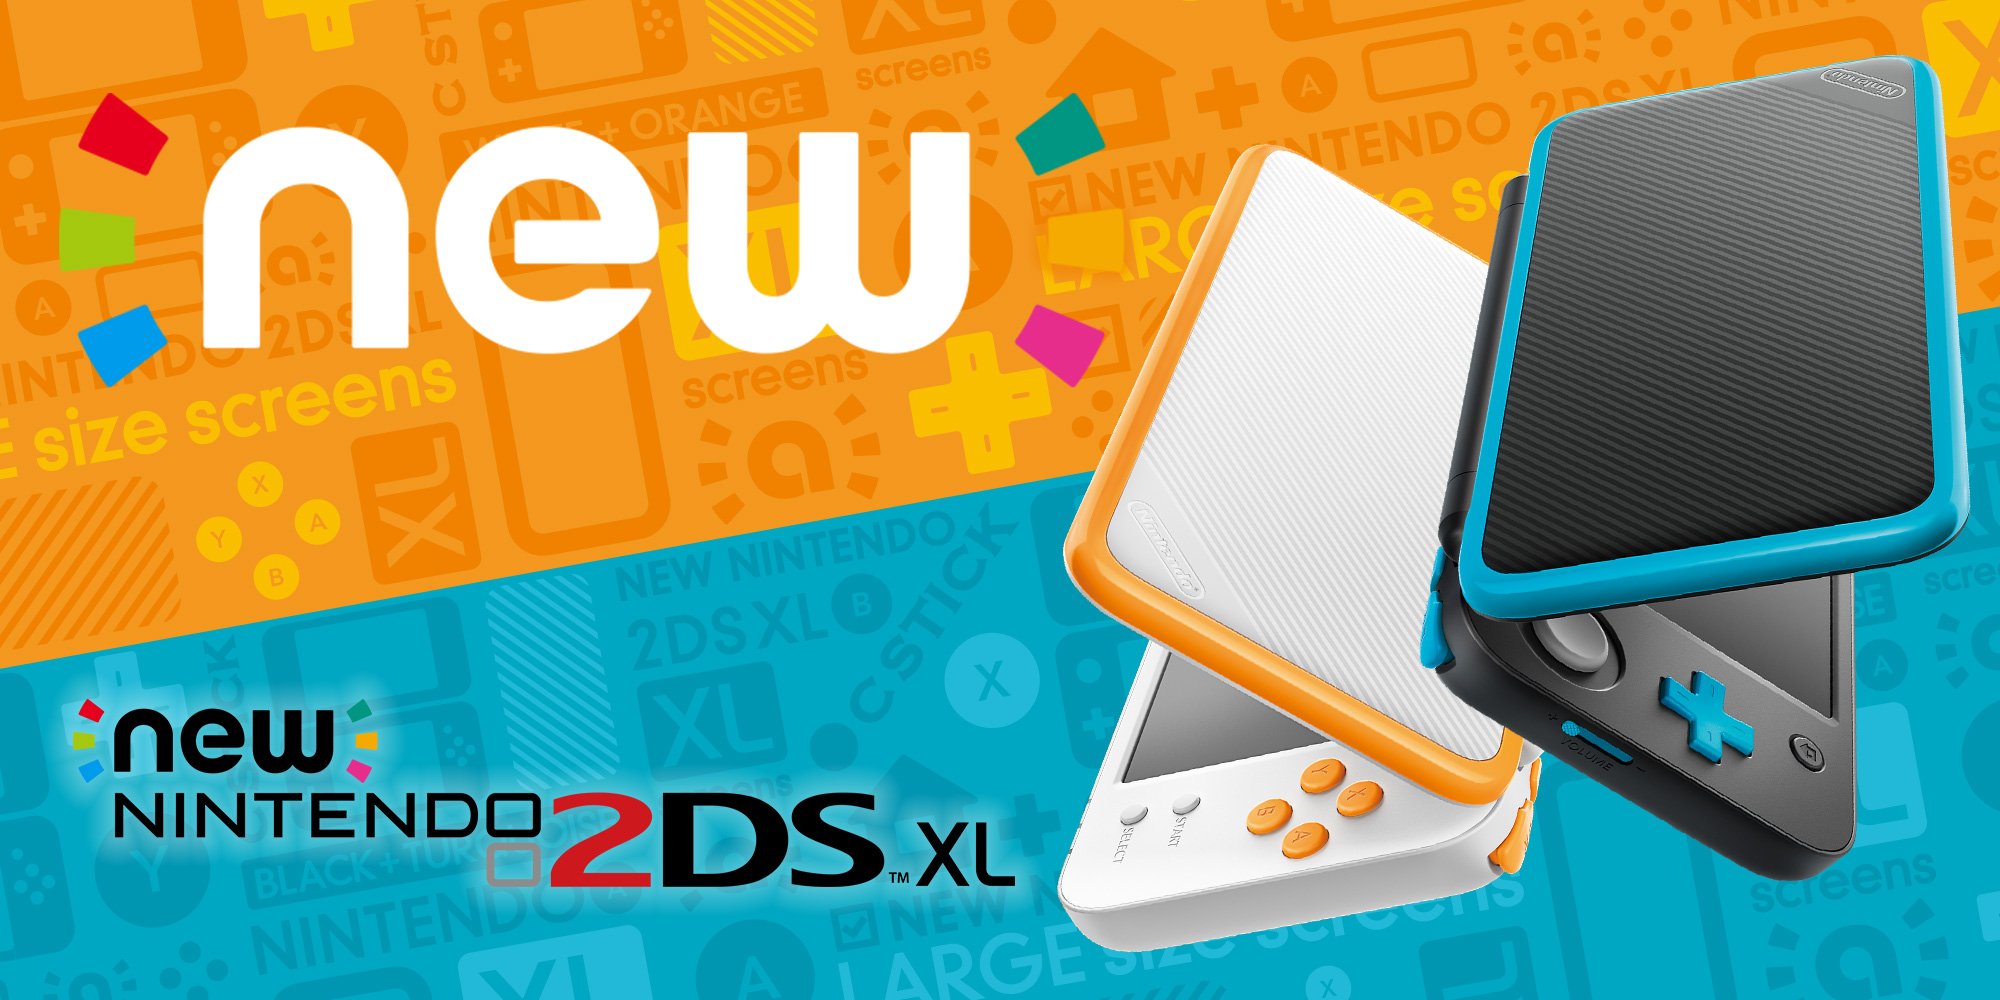 Nintendo to launch New Nintendo 2DS XL portable system on July 28th